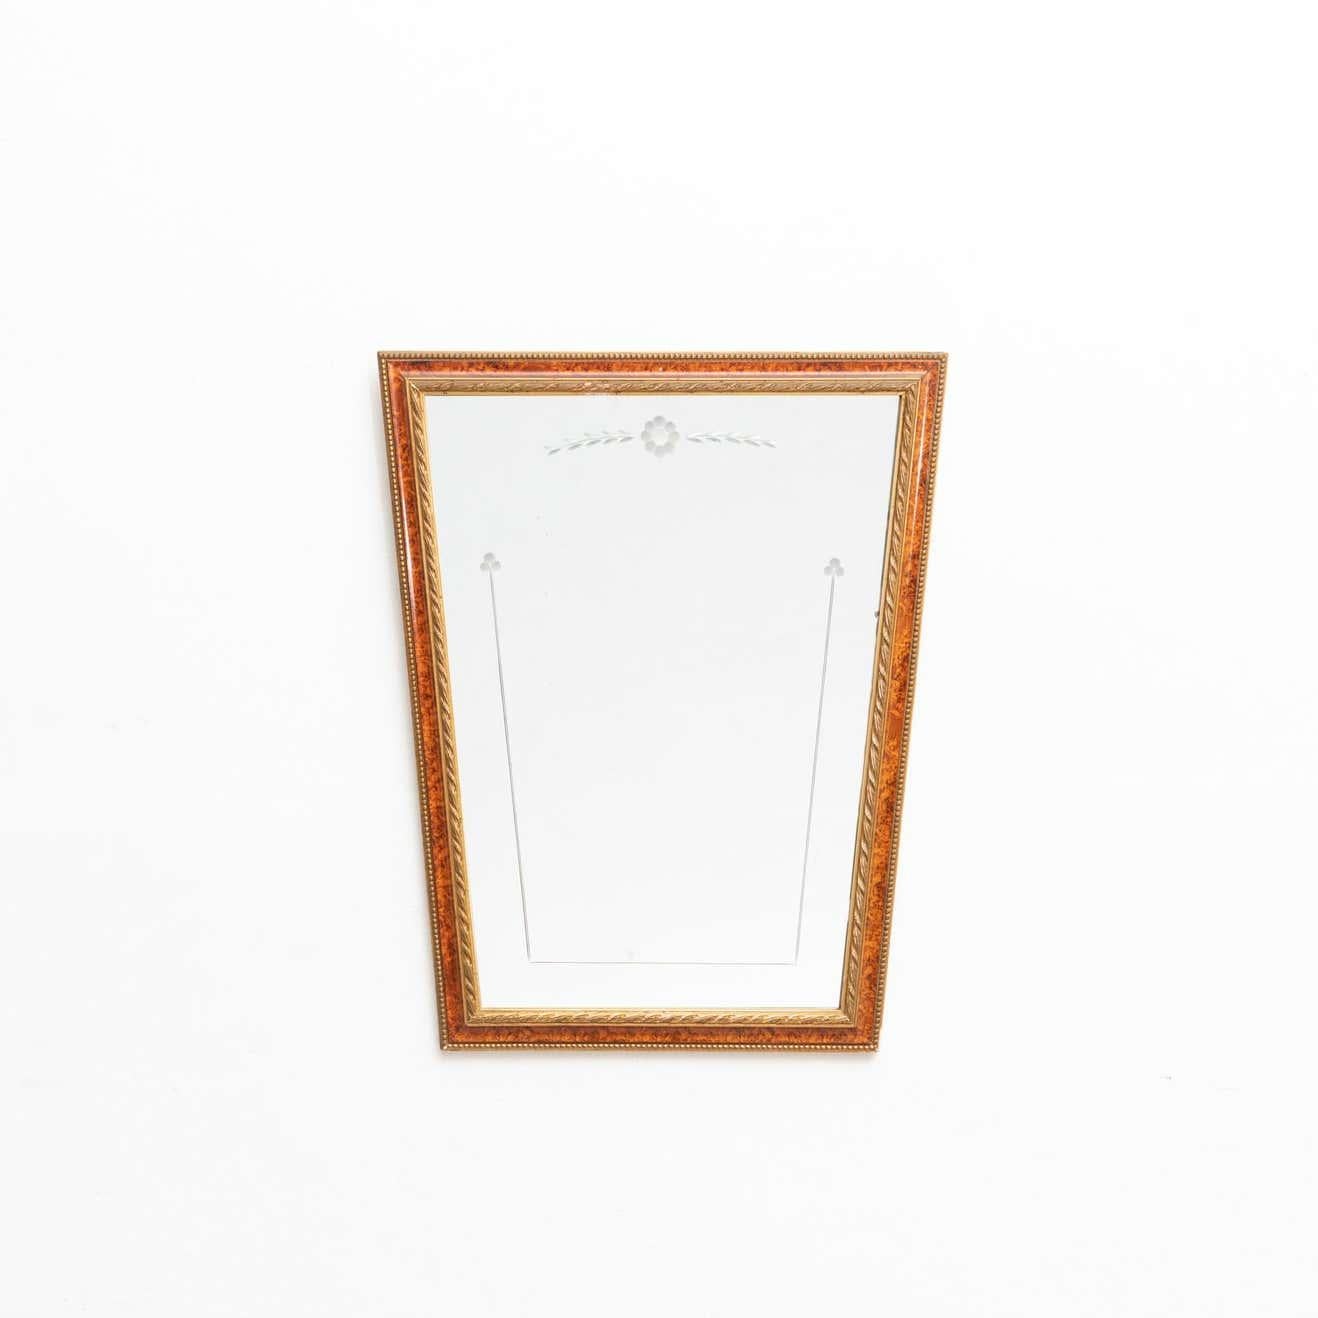 Handcrafted mid-century wood mirror made in Spain, circa 1950.
Manufactured in wood.

In original condition, with minor wear consistent of age and use, preserving a beautiful patina.